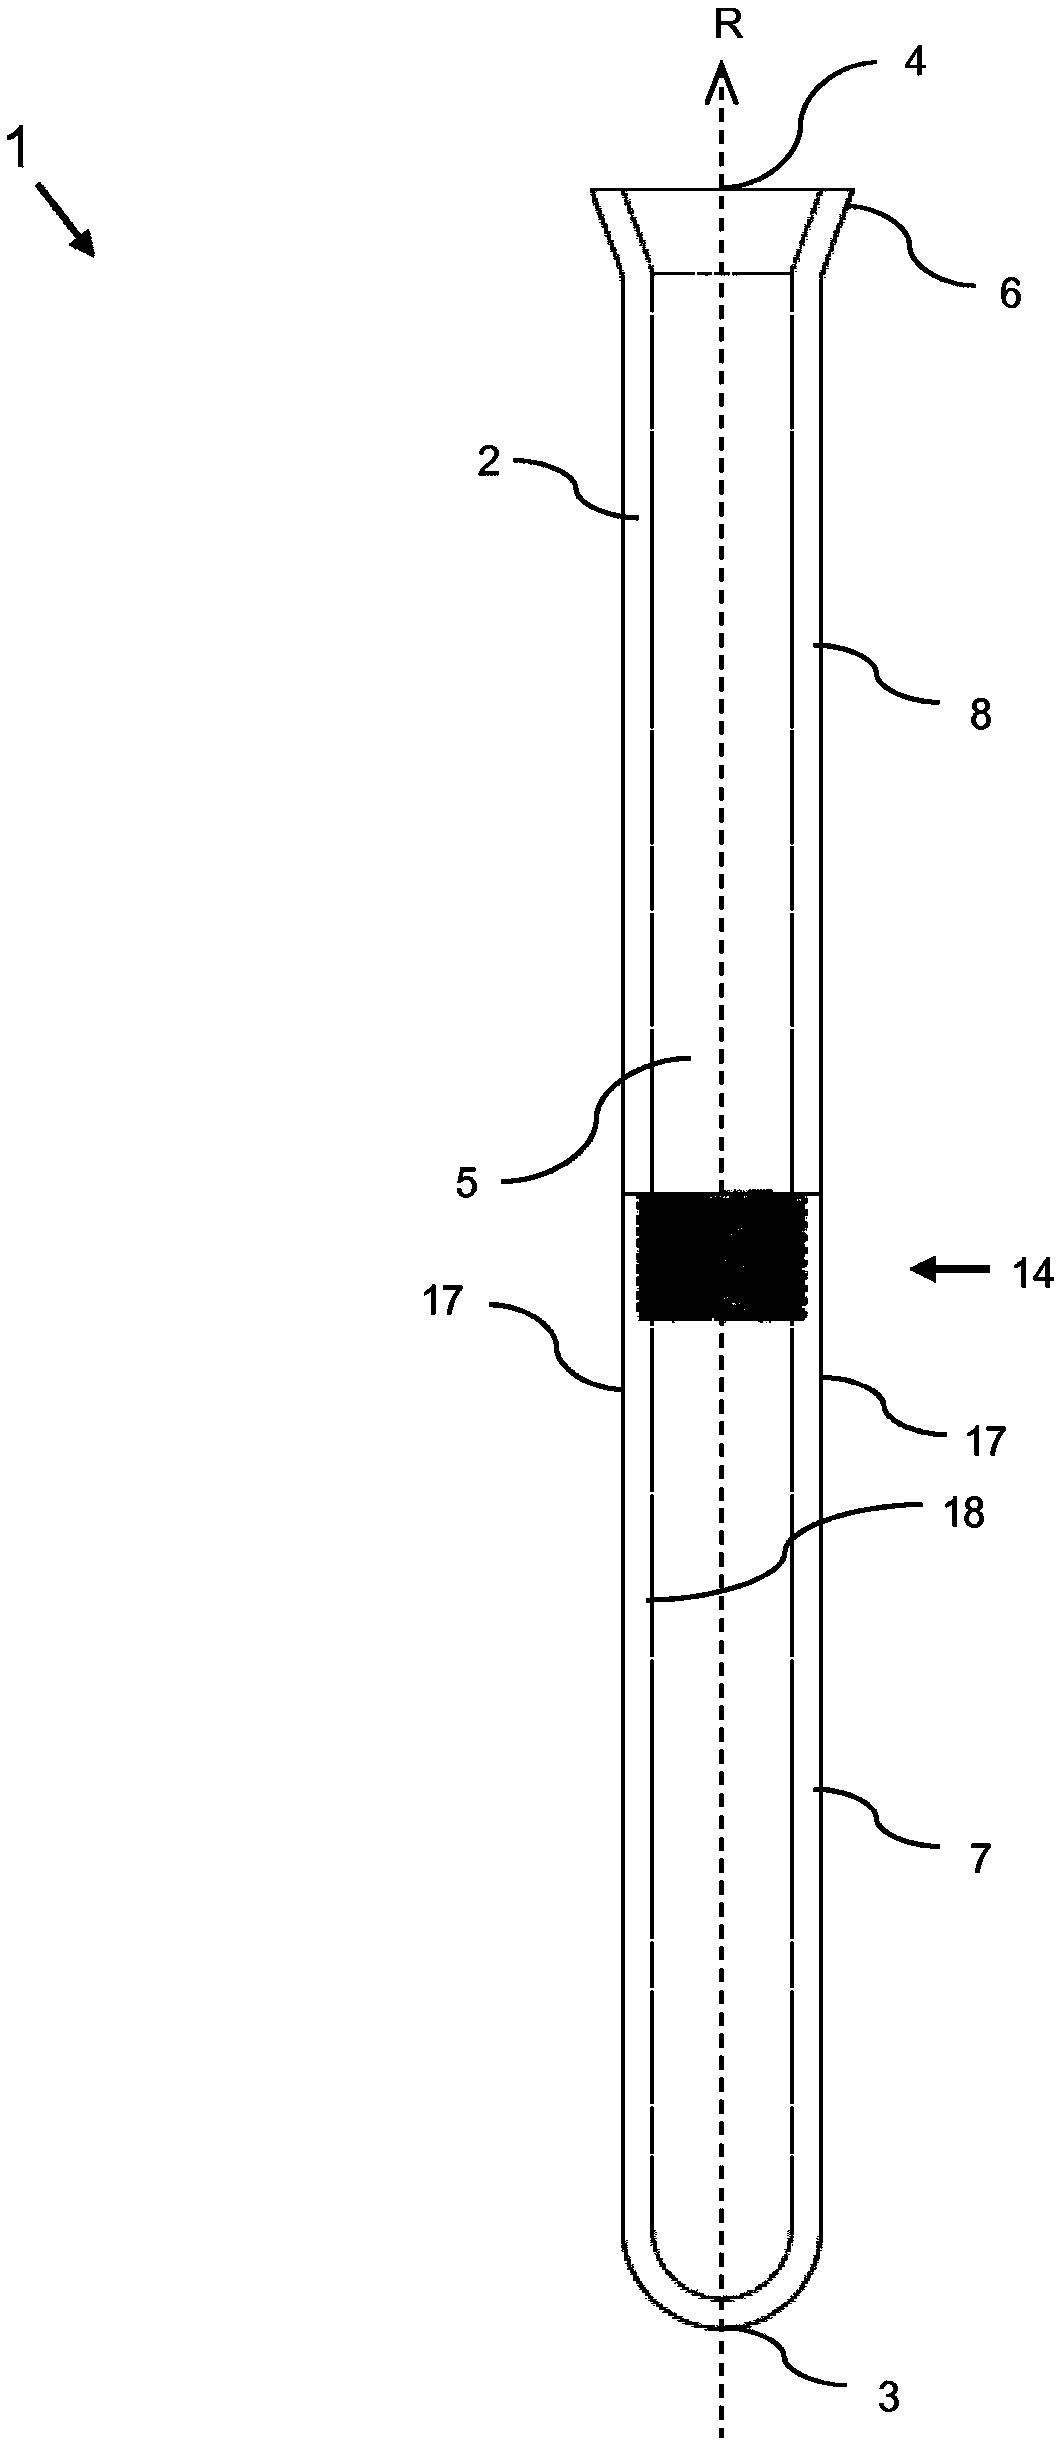 Filter element for filtering exhaust gases or process gases, and method for producing such a filter element